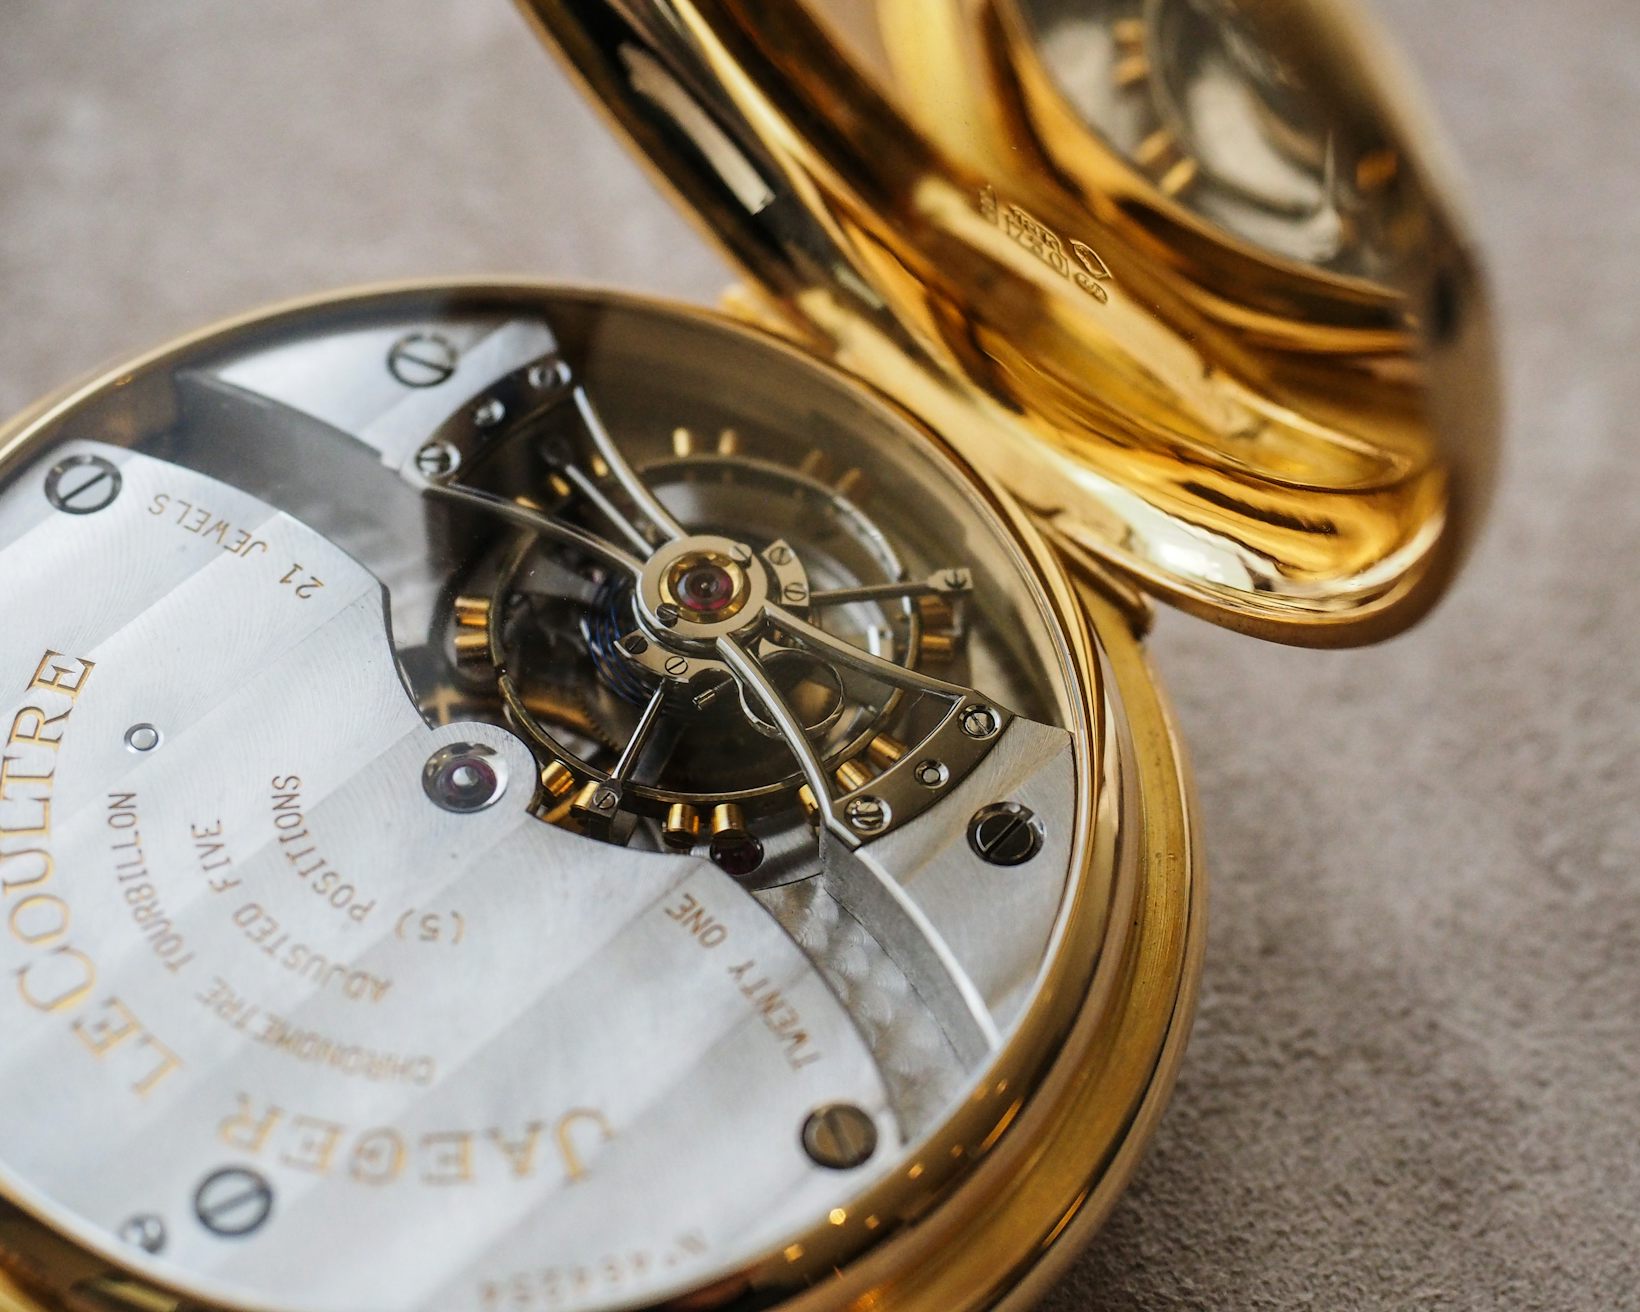 In-Depth: Does Great Movement Finishing Mean A Great Watch? - Hodinkee